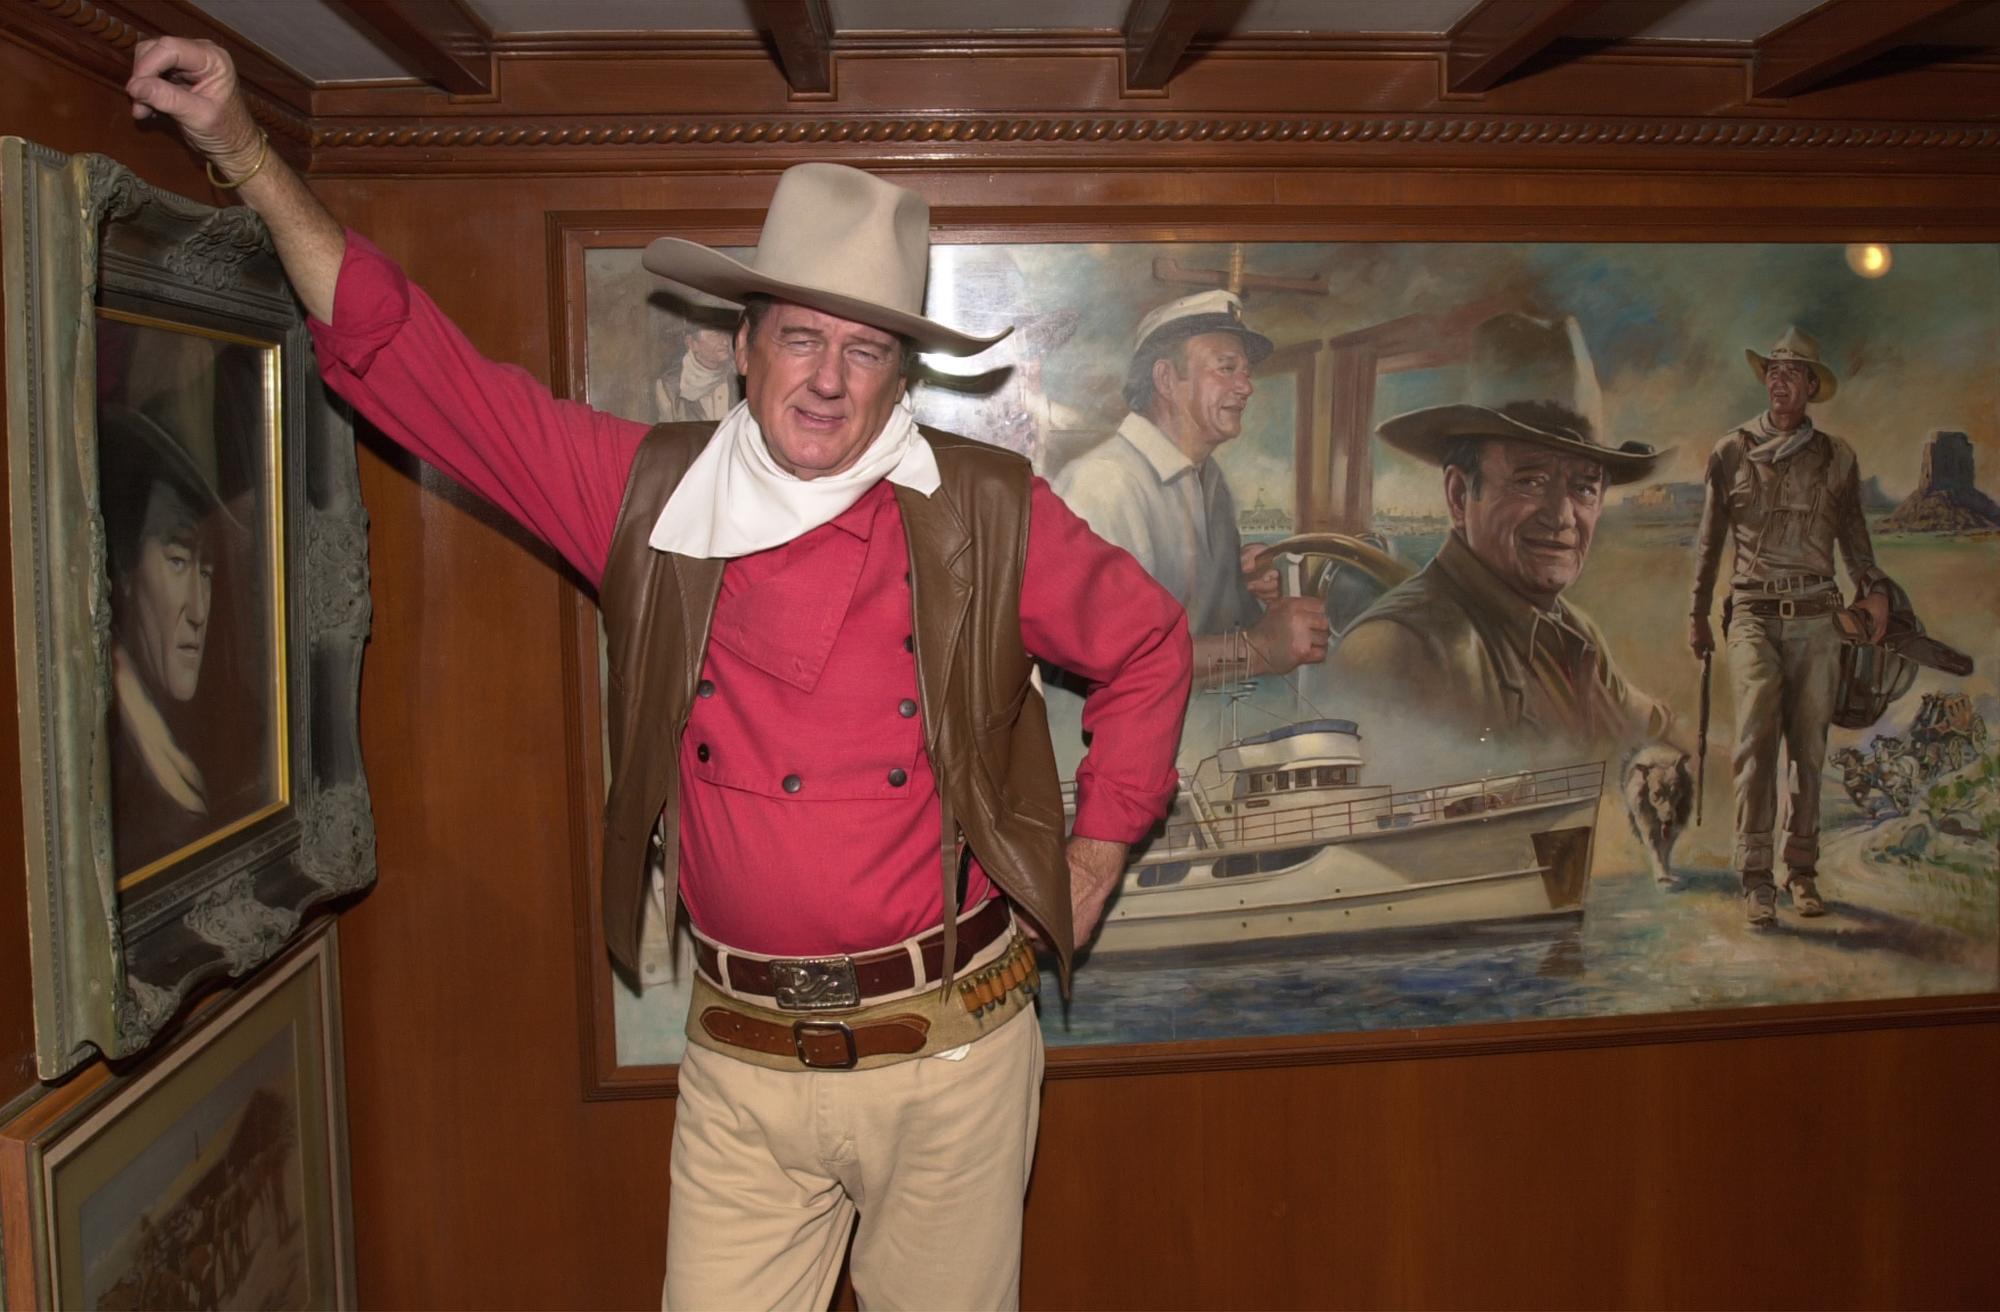 John Wayne impersonator Ermal Williamson stands in front of portraits of John Wayne at the Fall 2000 Book Bash on September 20, 2000 in Newport Beach, California. | Source: Getty Images